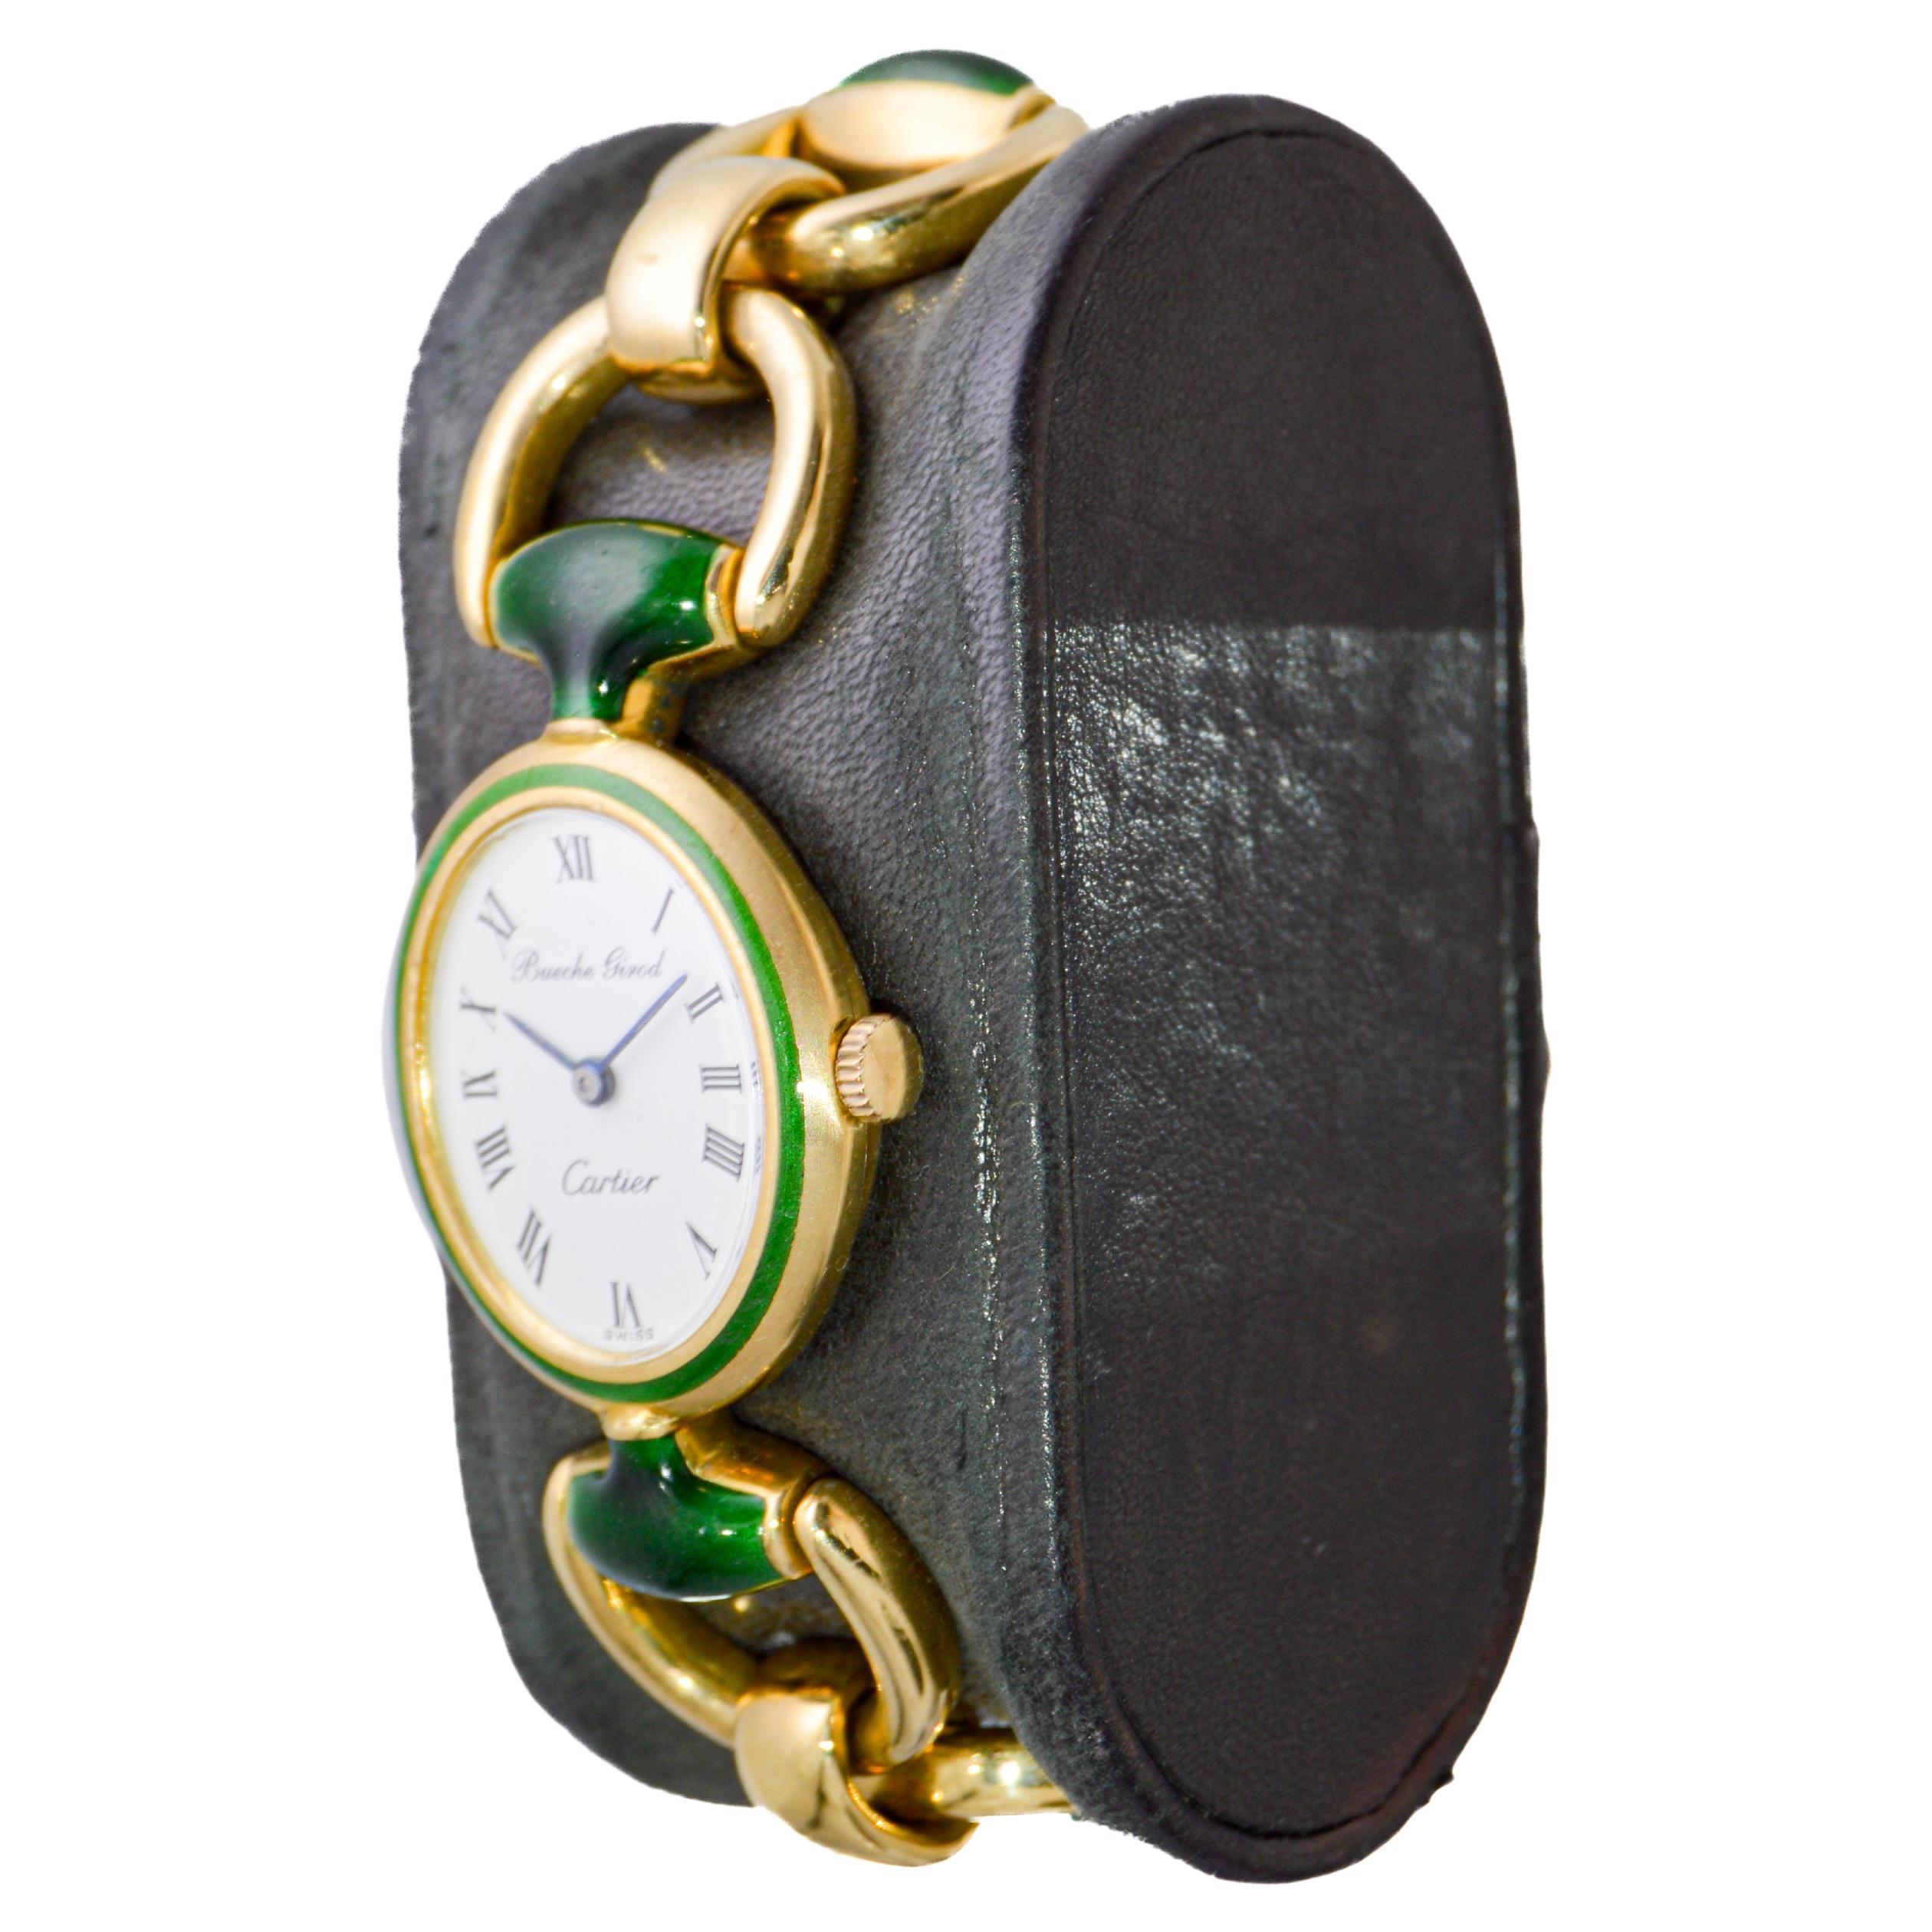 Modernist Cartier by Bueche Girod Yellow Gold Enamel Manual Wind Watch, circa 1970s For Sale